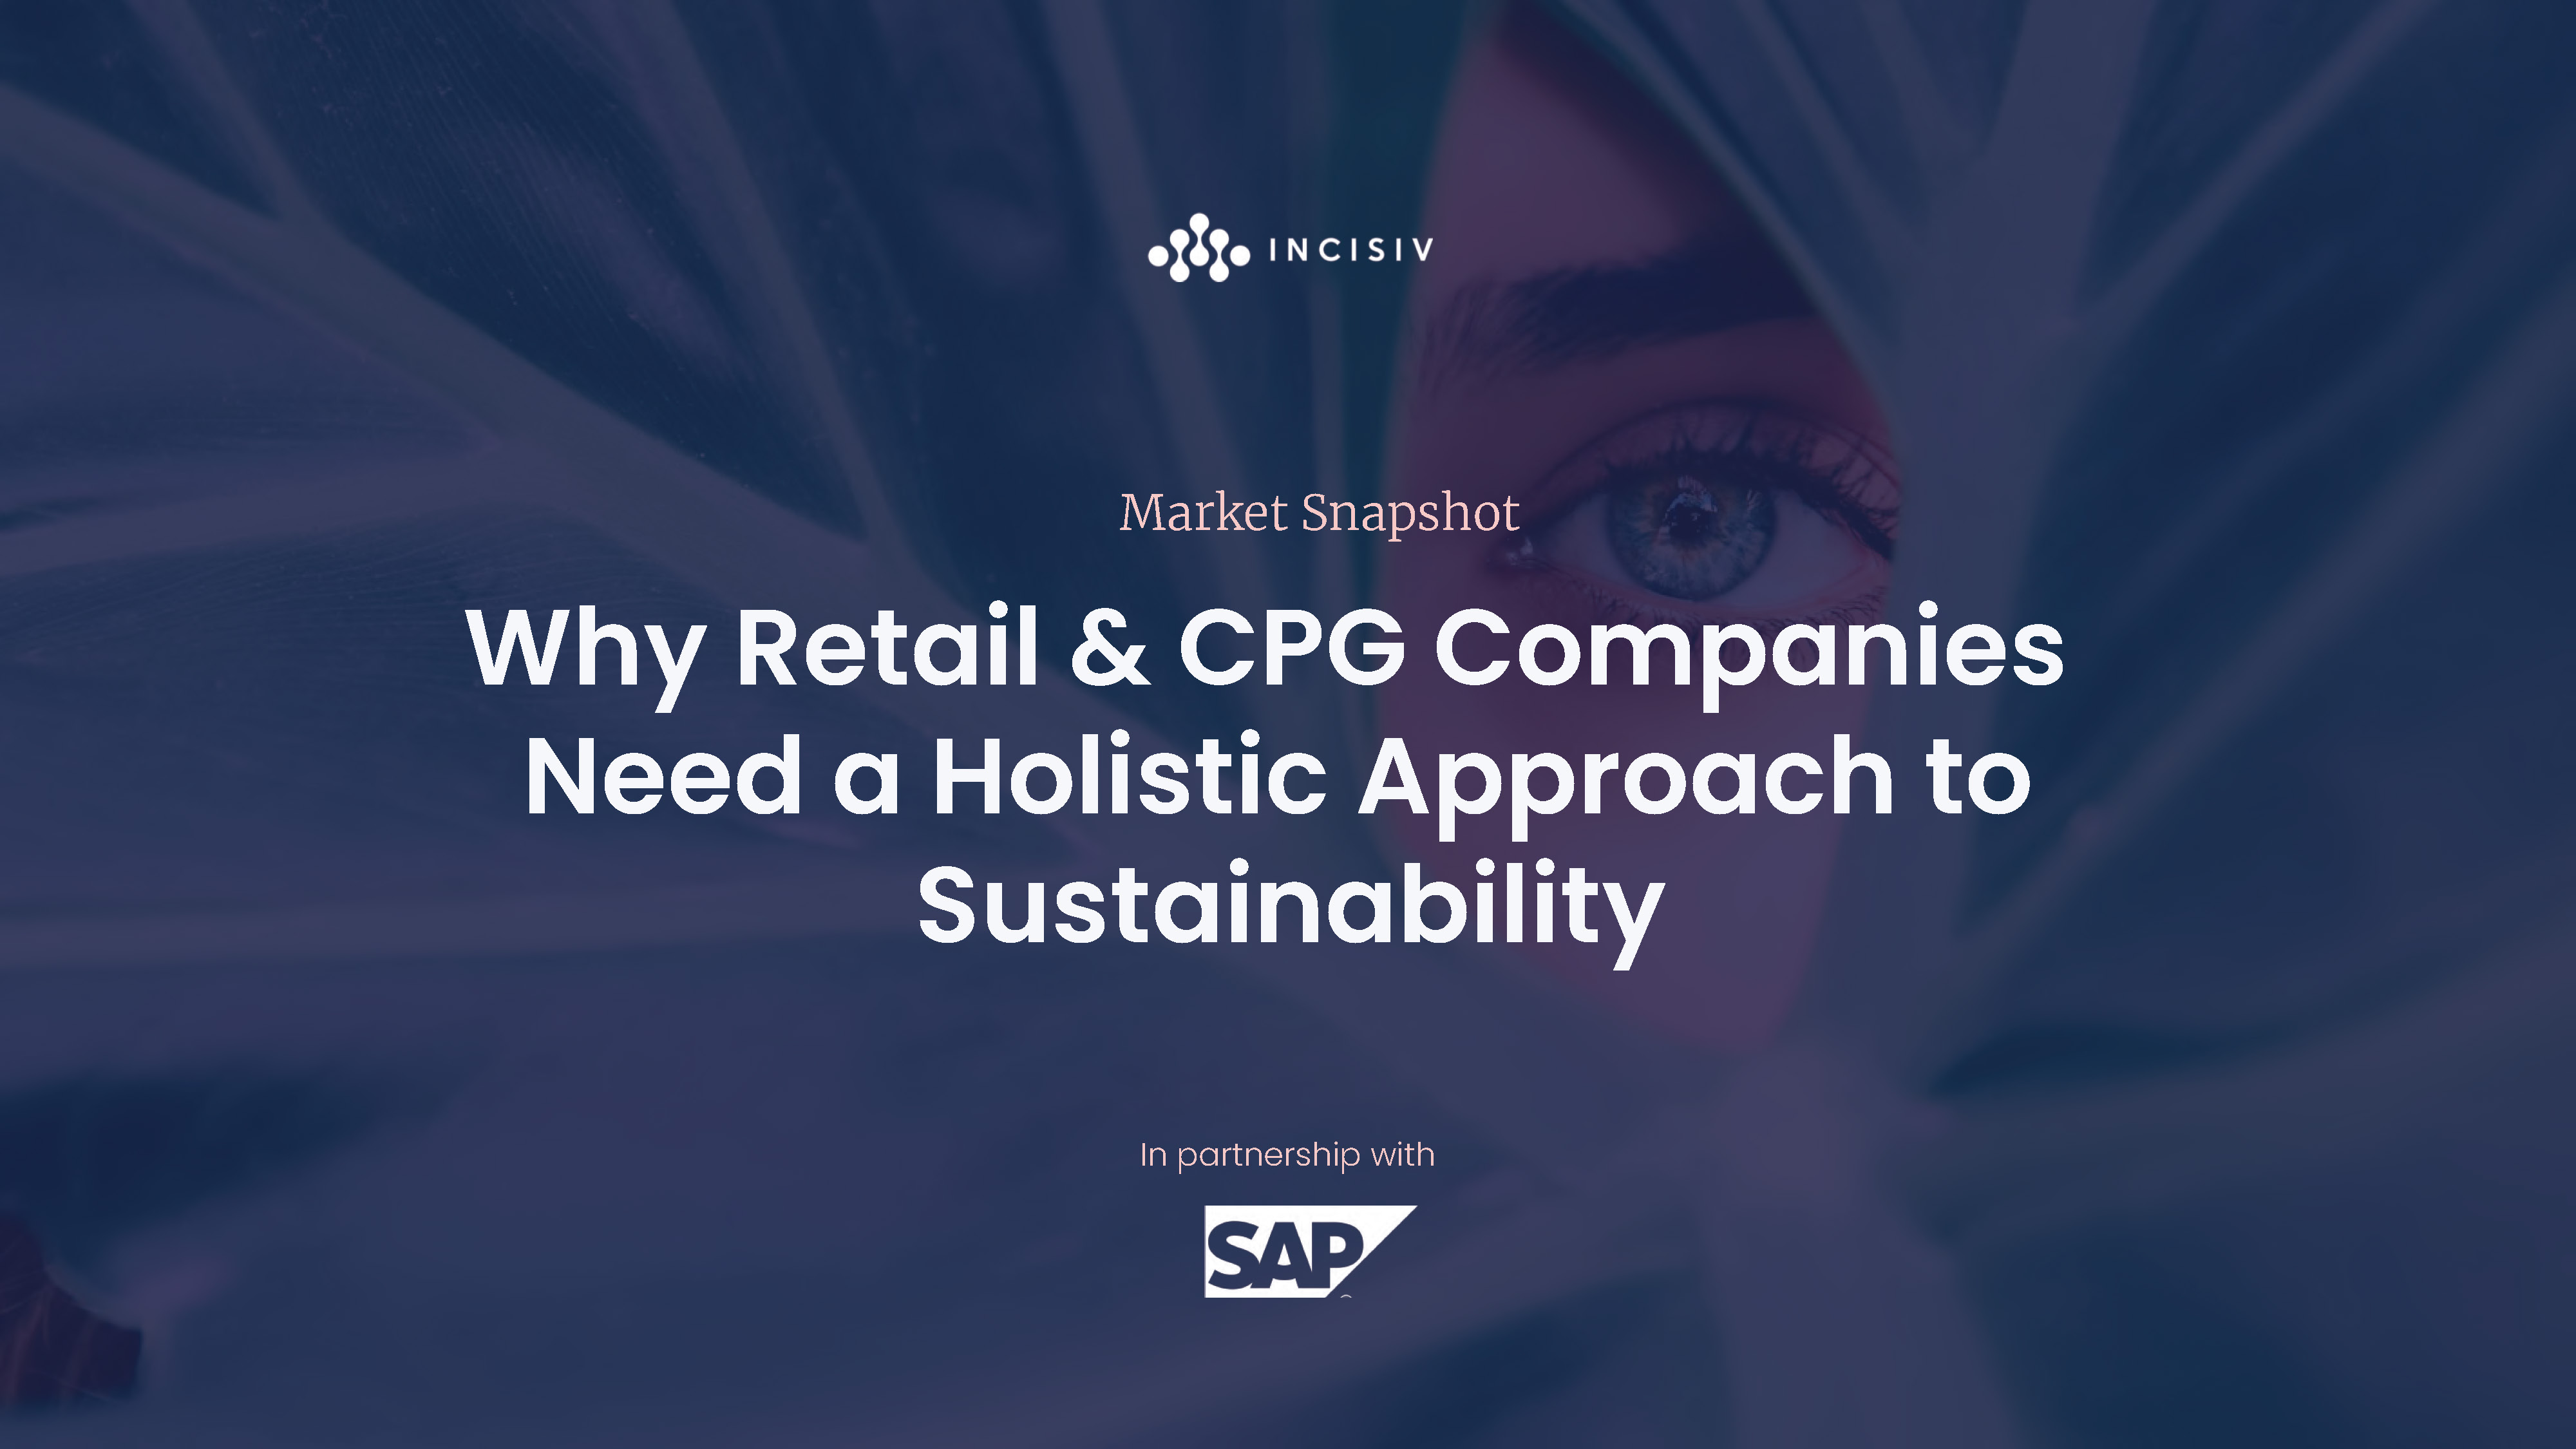 Why Retailers & Consumer Brands Need a Holistic Approach to Sustainability